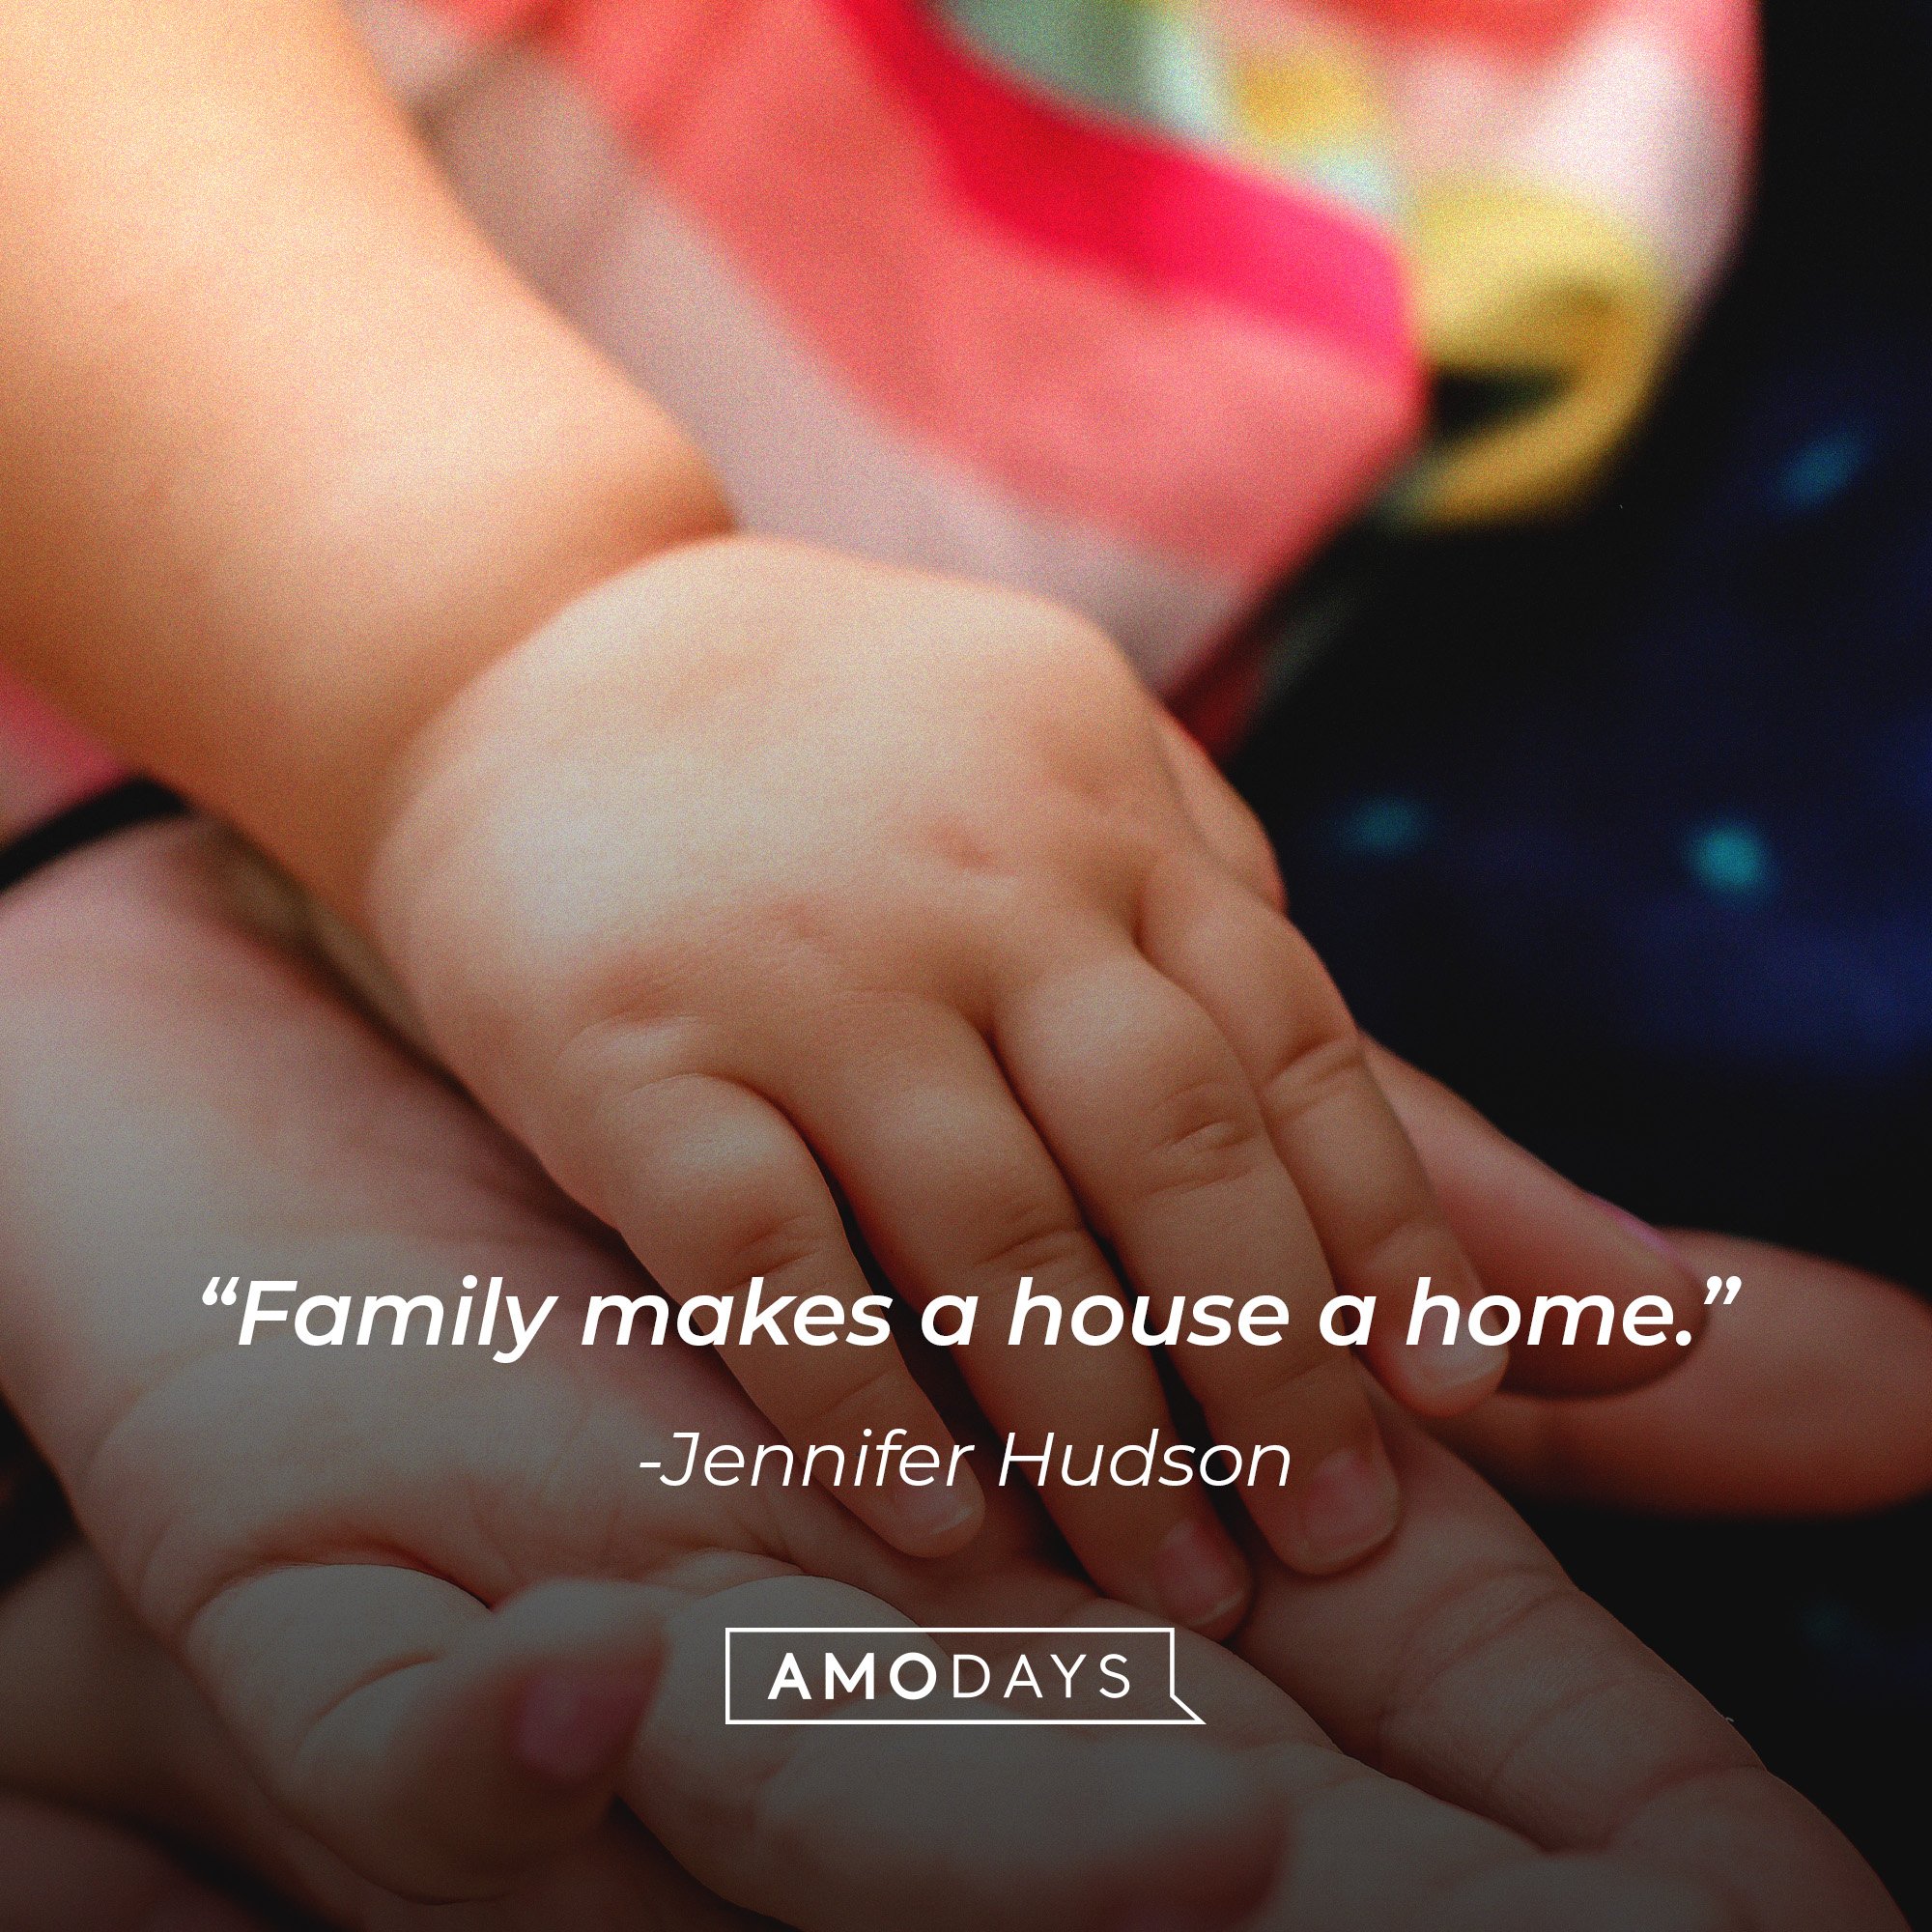 Jennifer Hudson's quote: “Family makes a house a home.” | Image: AmoDays